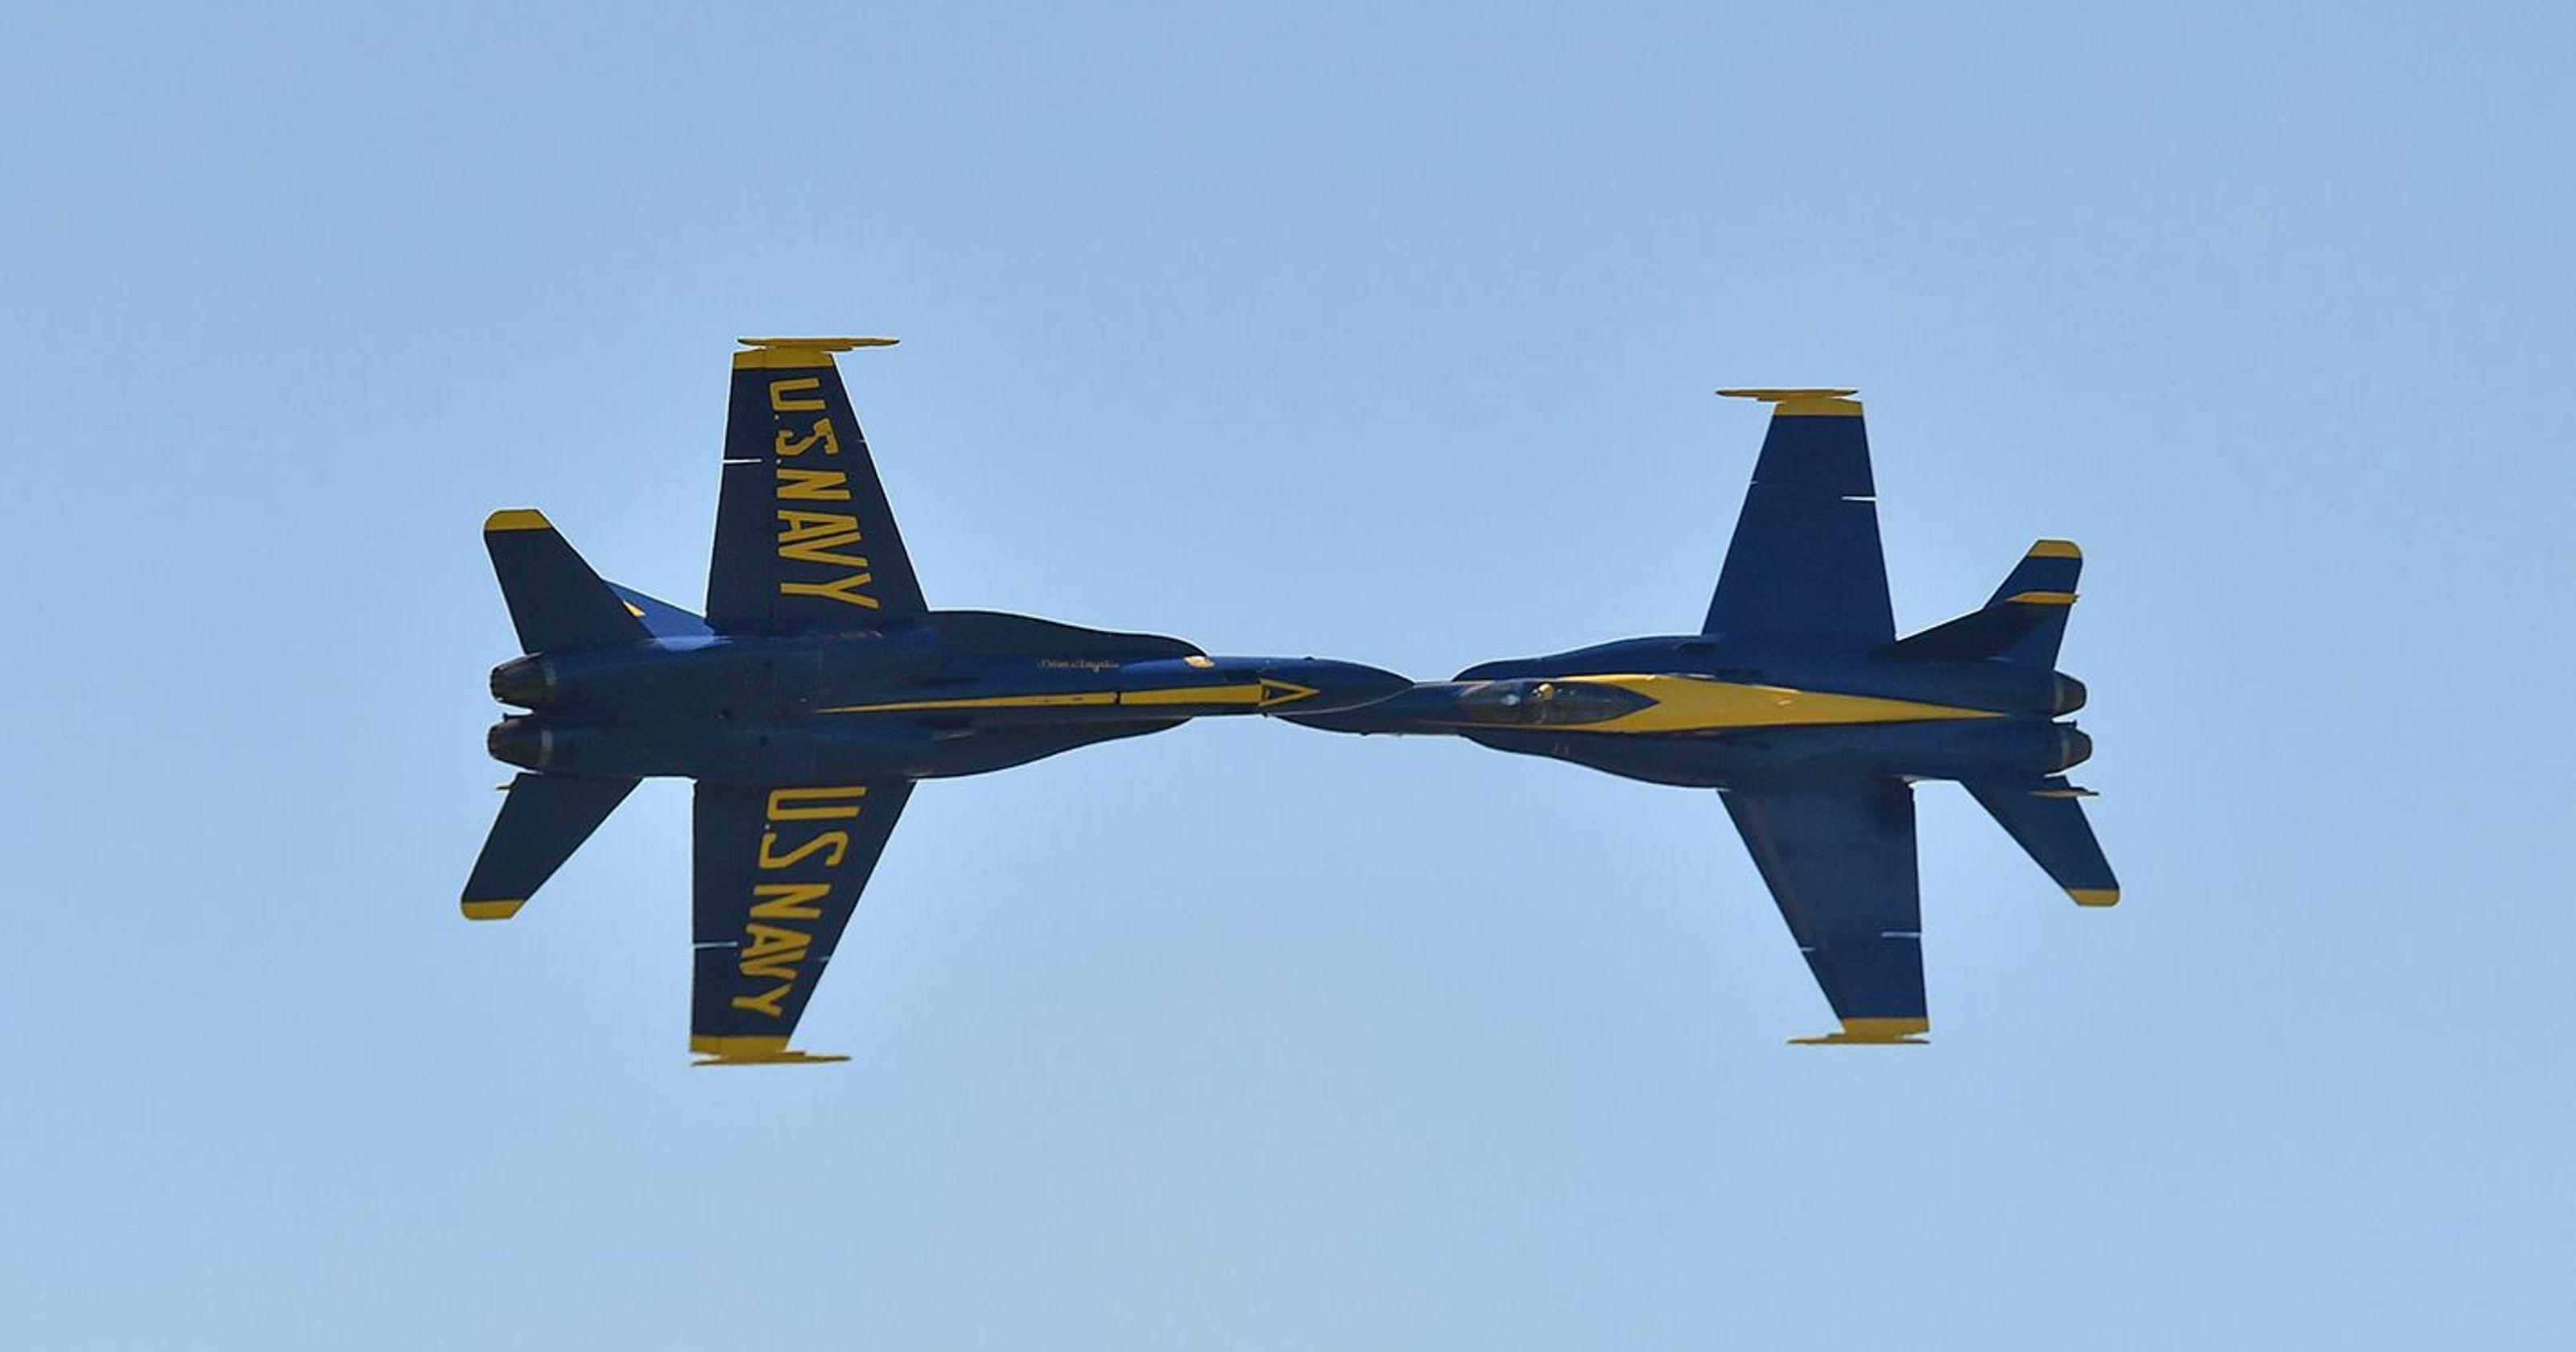 Blue Angels US Navy Logo - Blue Angels schedule for 2018 air show season, practices at